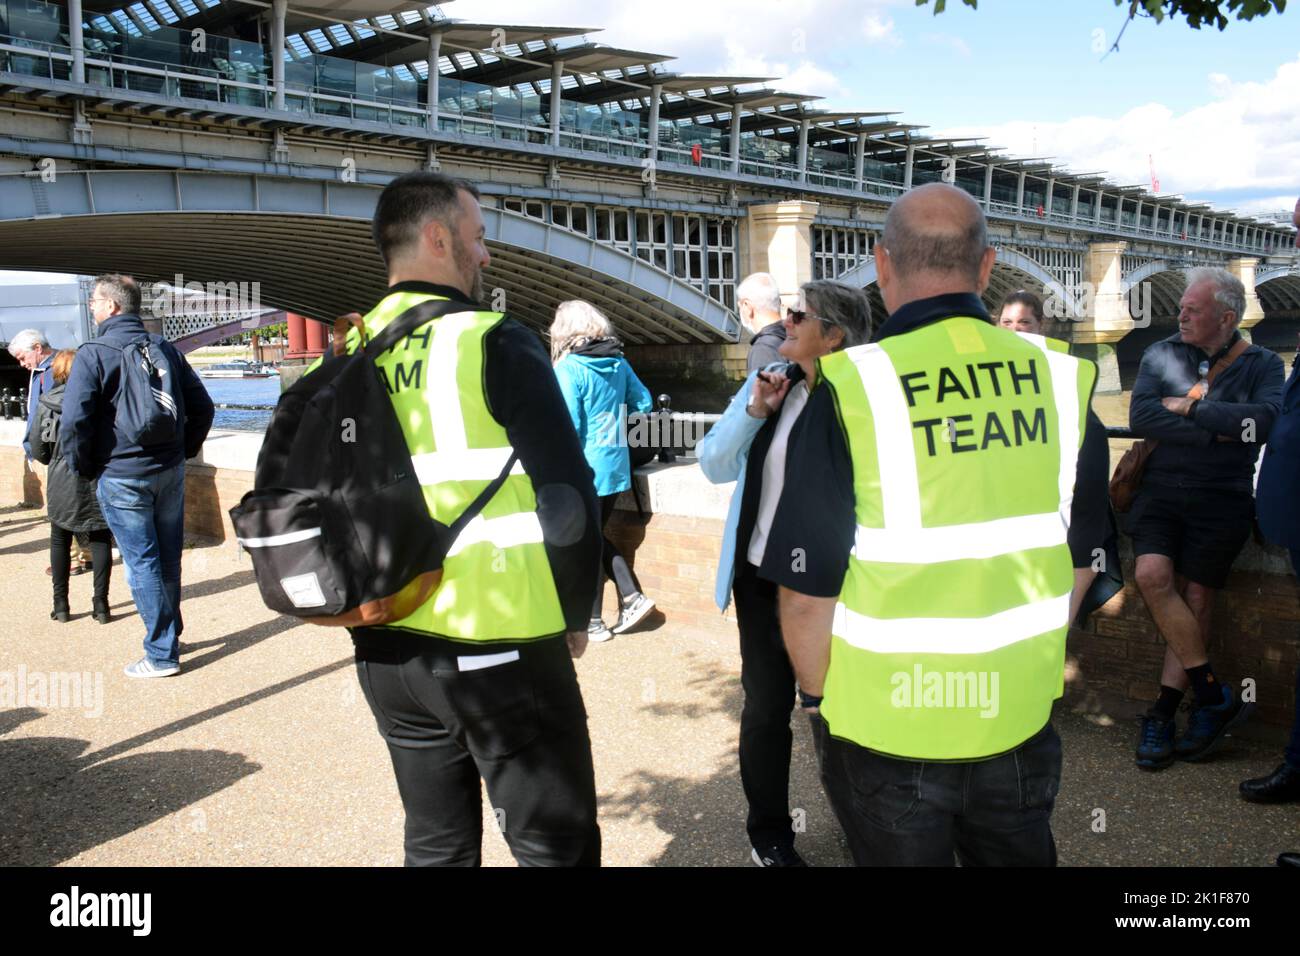 Faith Team supporting people queuing along River Thames in order to view Queen Elizabeth II's coffin, London UK Sep 2022 Stock Photo